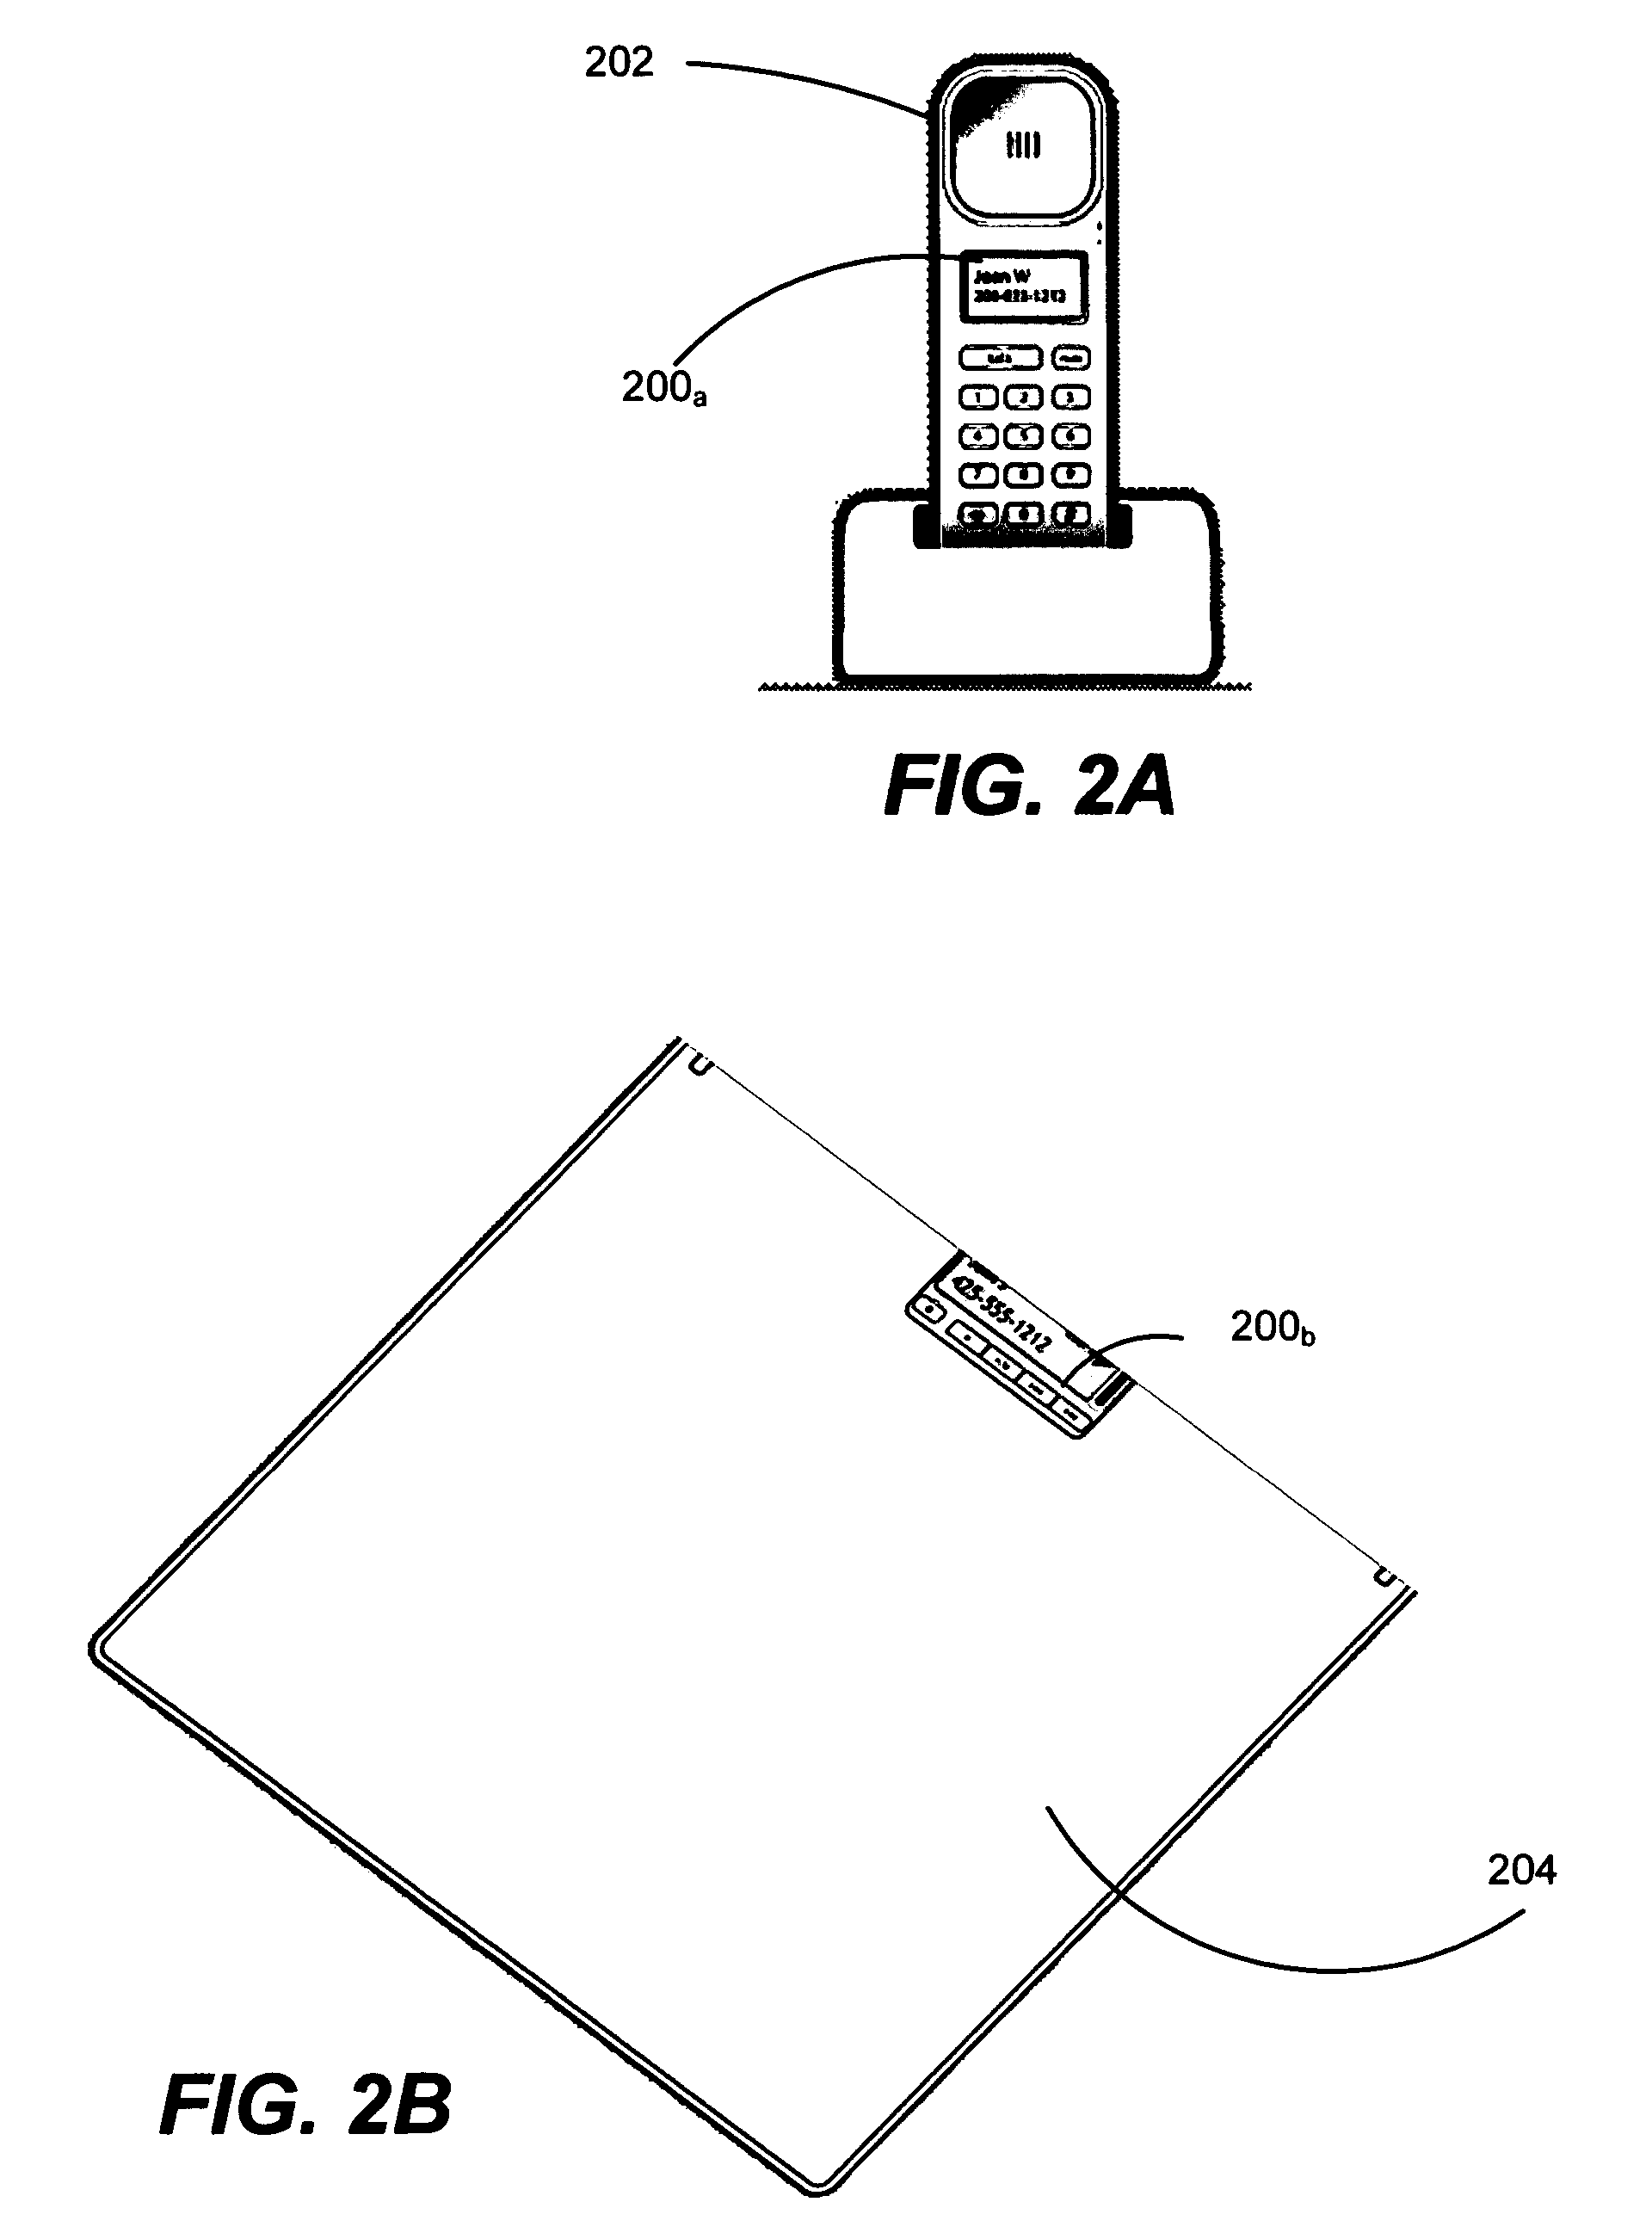 Waking a main computer system to pre-fetch data for an auxiliary computing device